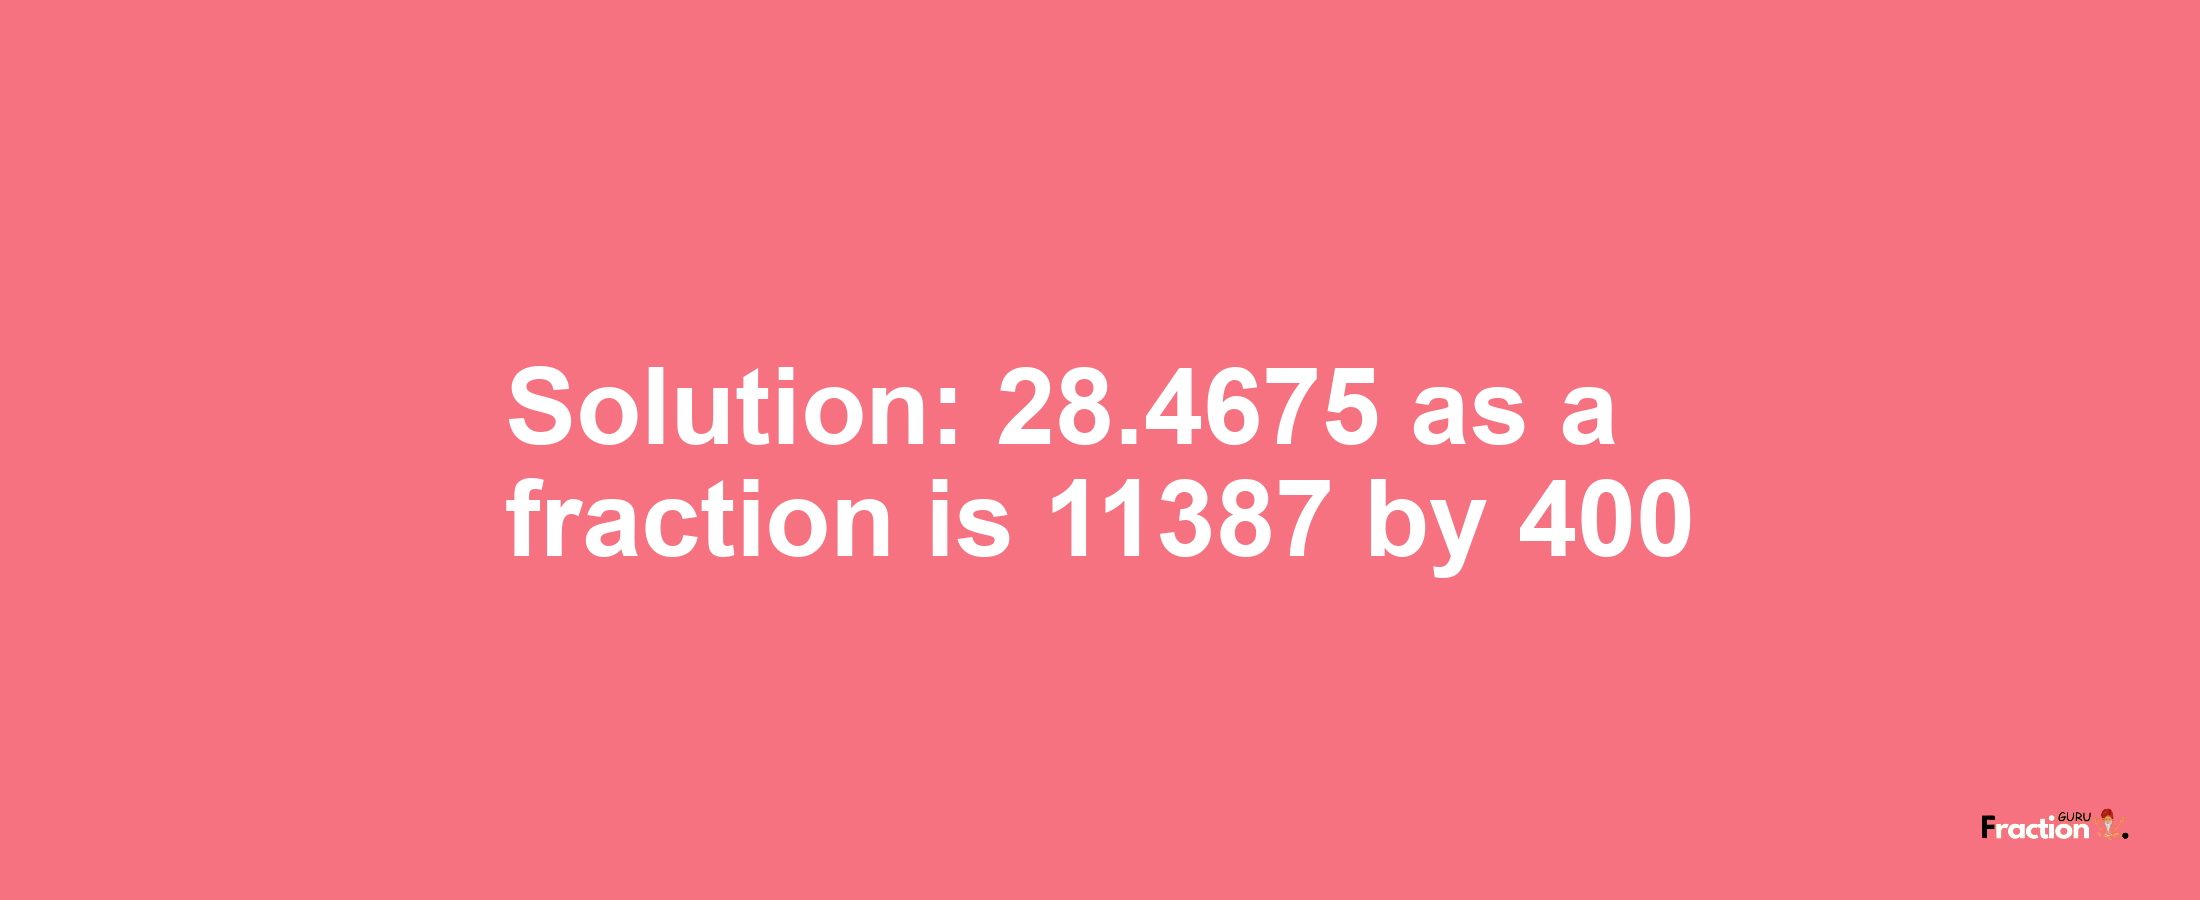 Solution:28.4675 as a fraction is 11387/400